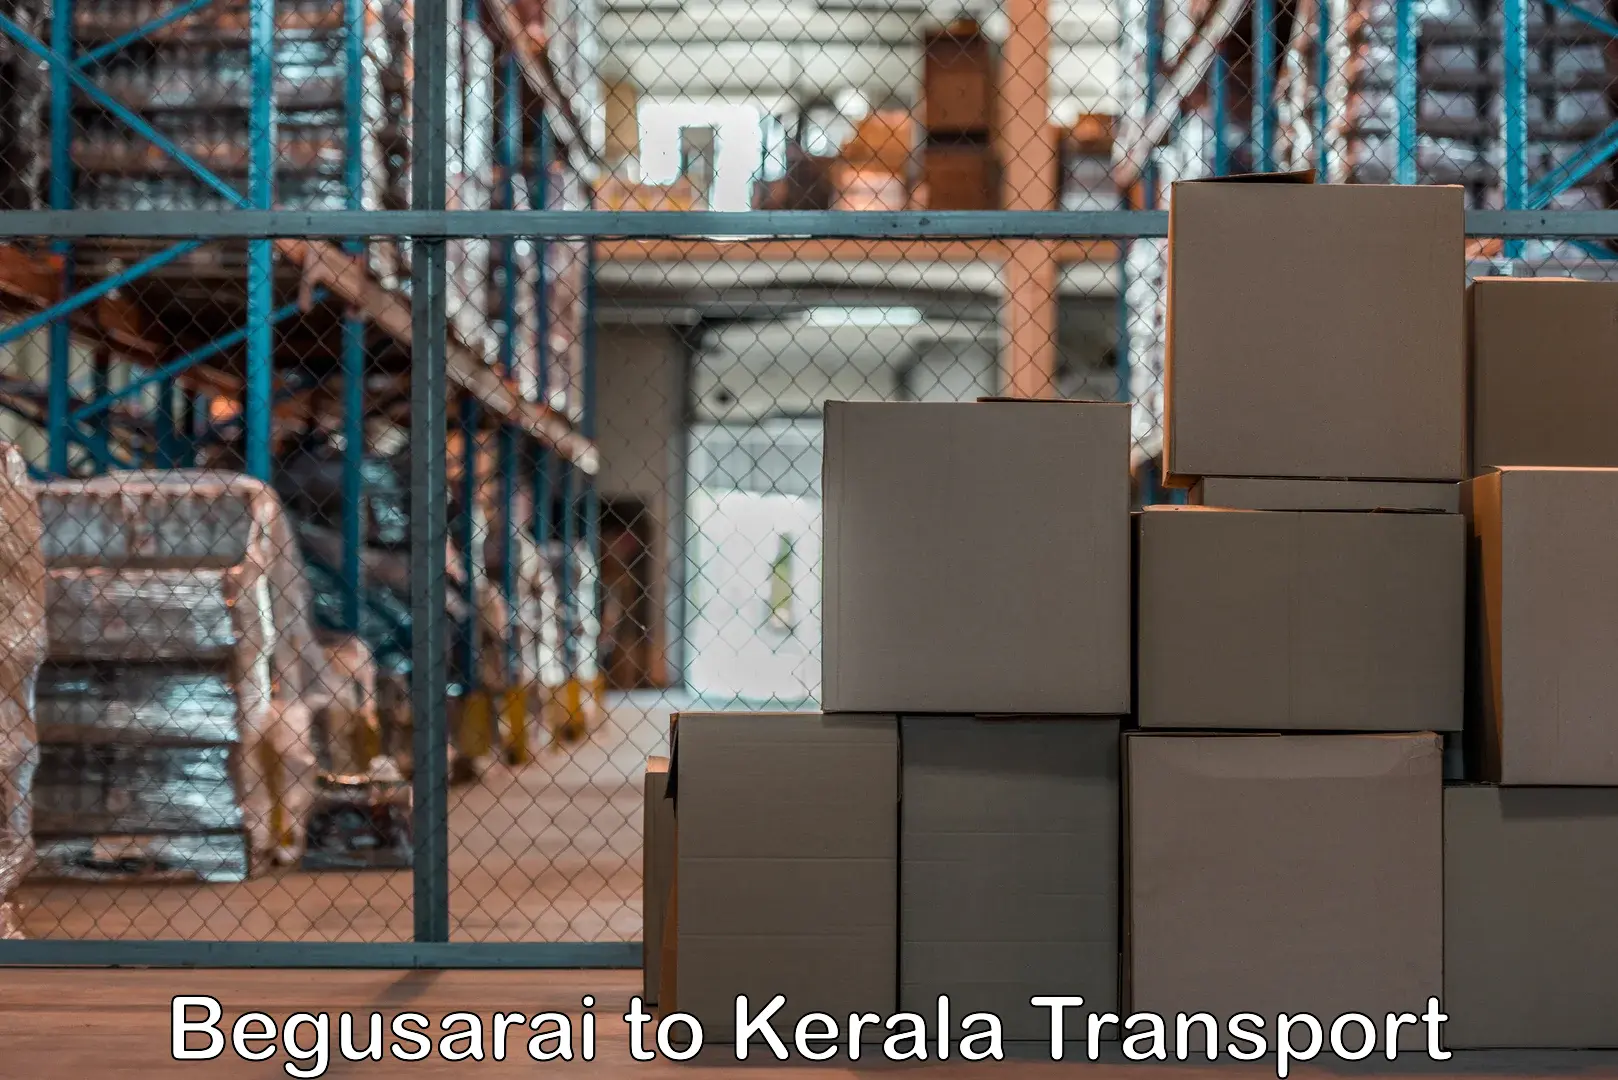 Truck transport companies in India Begusarai to Cochin University of Science and Technology